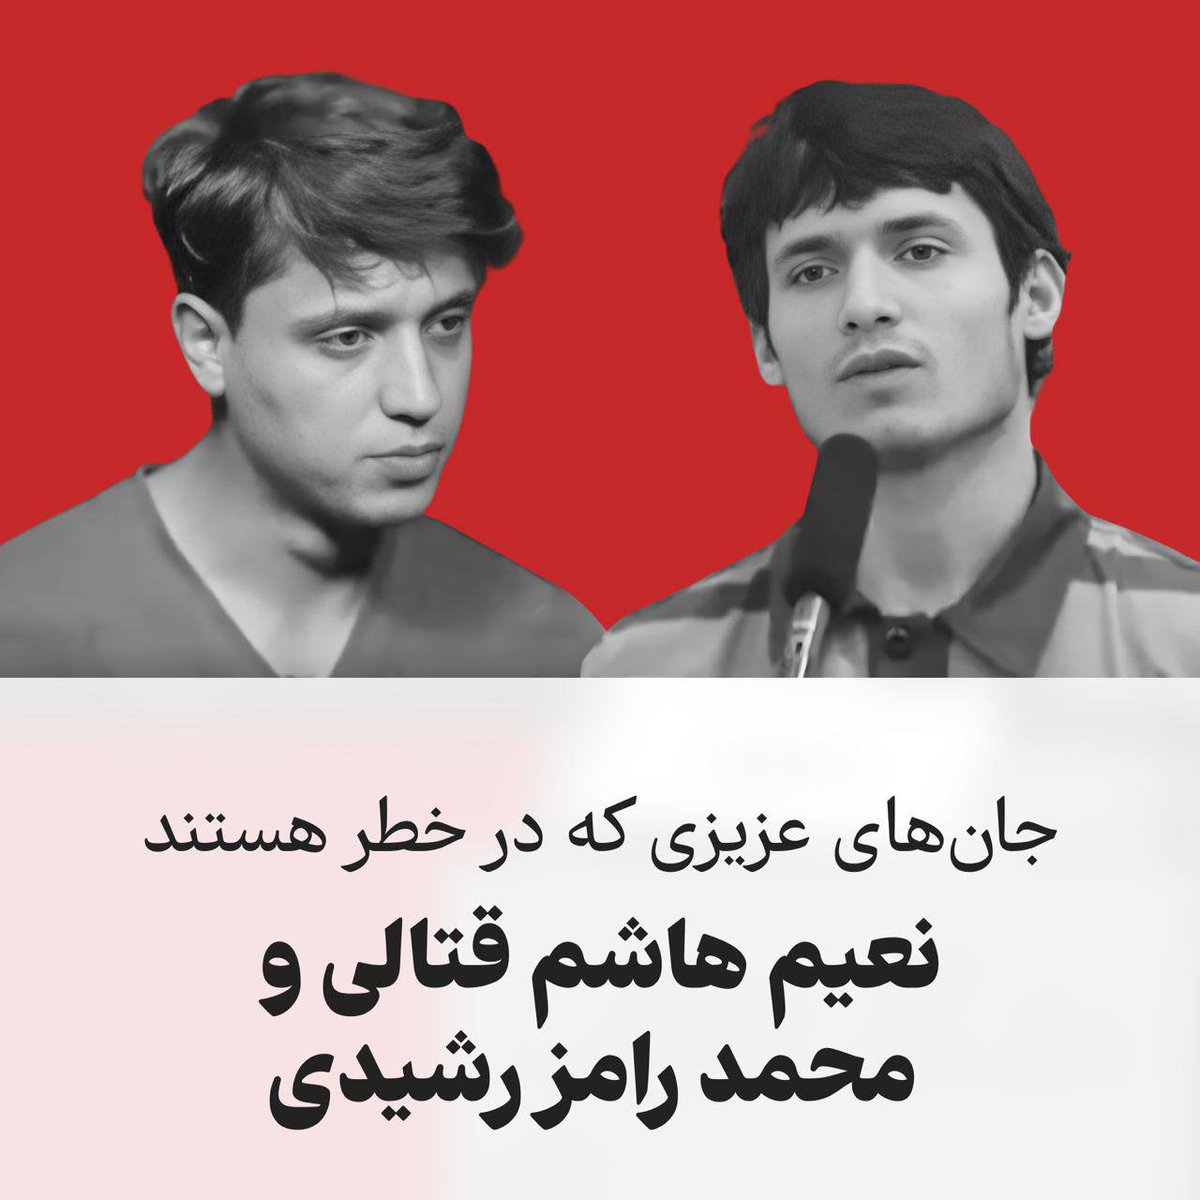 Three other Iranian youths who have been sentenced to death.
Their lives are in danger, and they may be executed every time.⚠️😔

#MohammadGhobadloo 
#NaeimHashemGhotali 
#MohammadRamezRashidi 

Be their voice 🕊️📢
#IranRevoIution